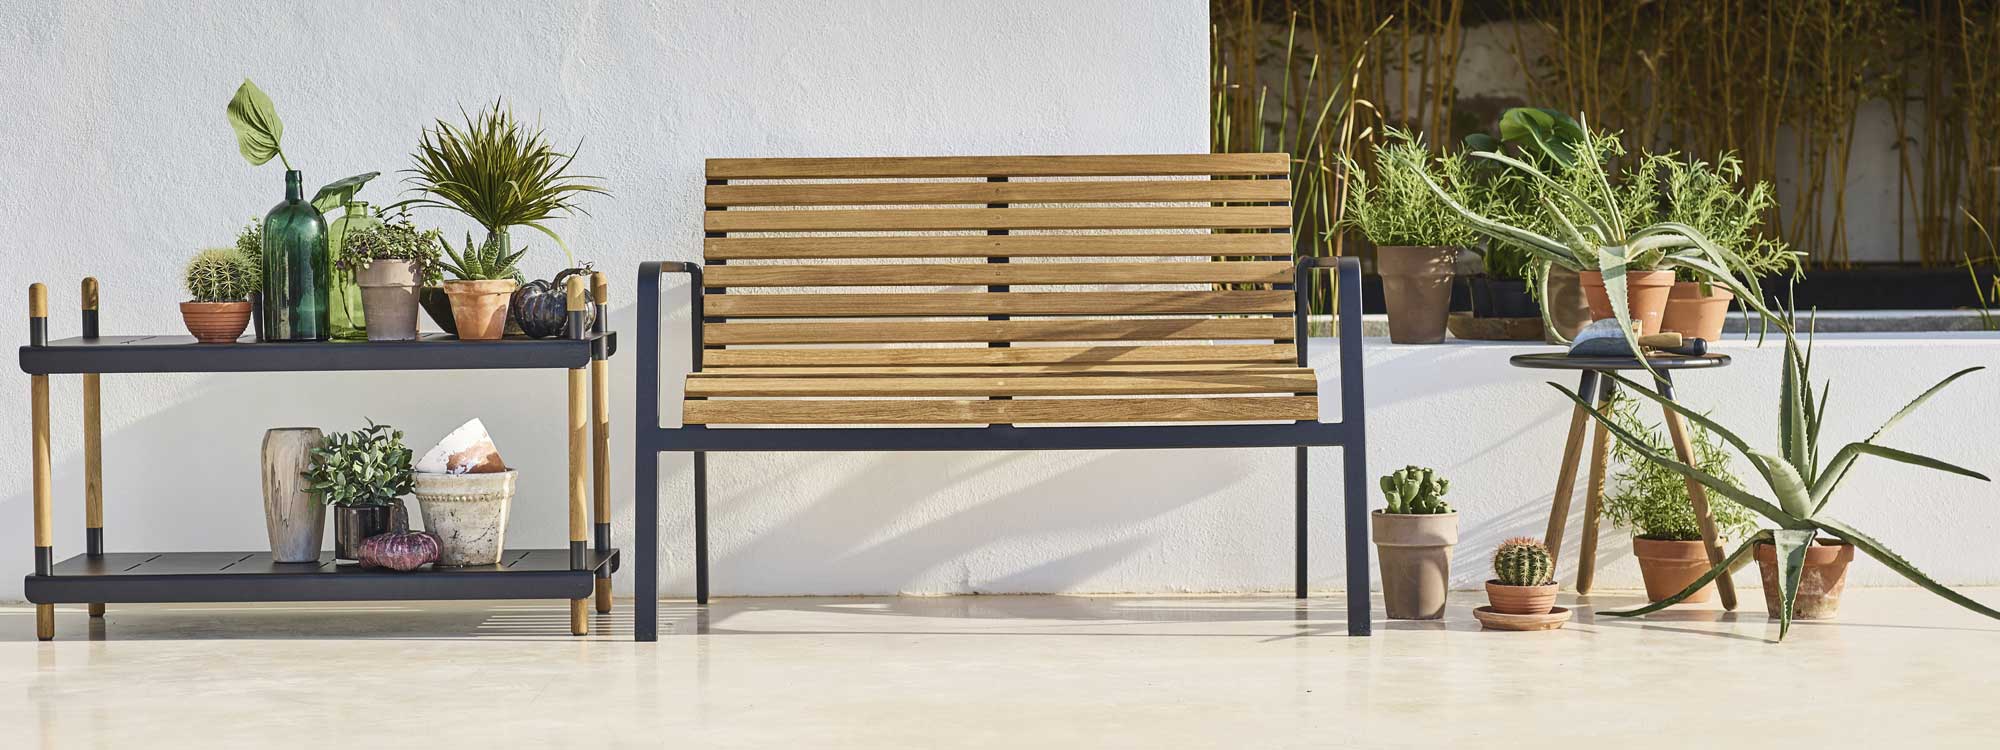 Image of Parc bench and Frame garden shelves by Cane-line